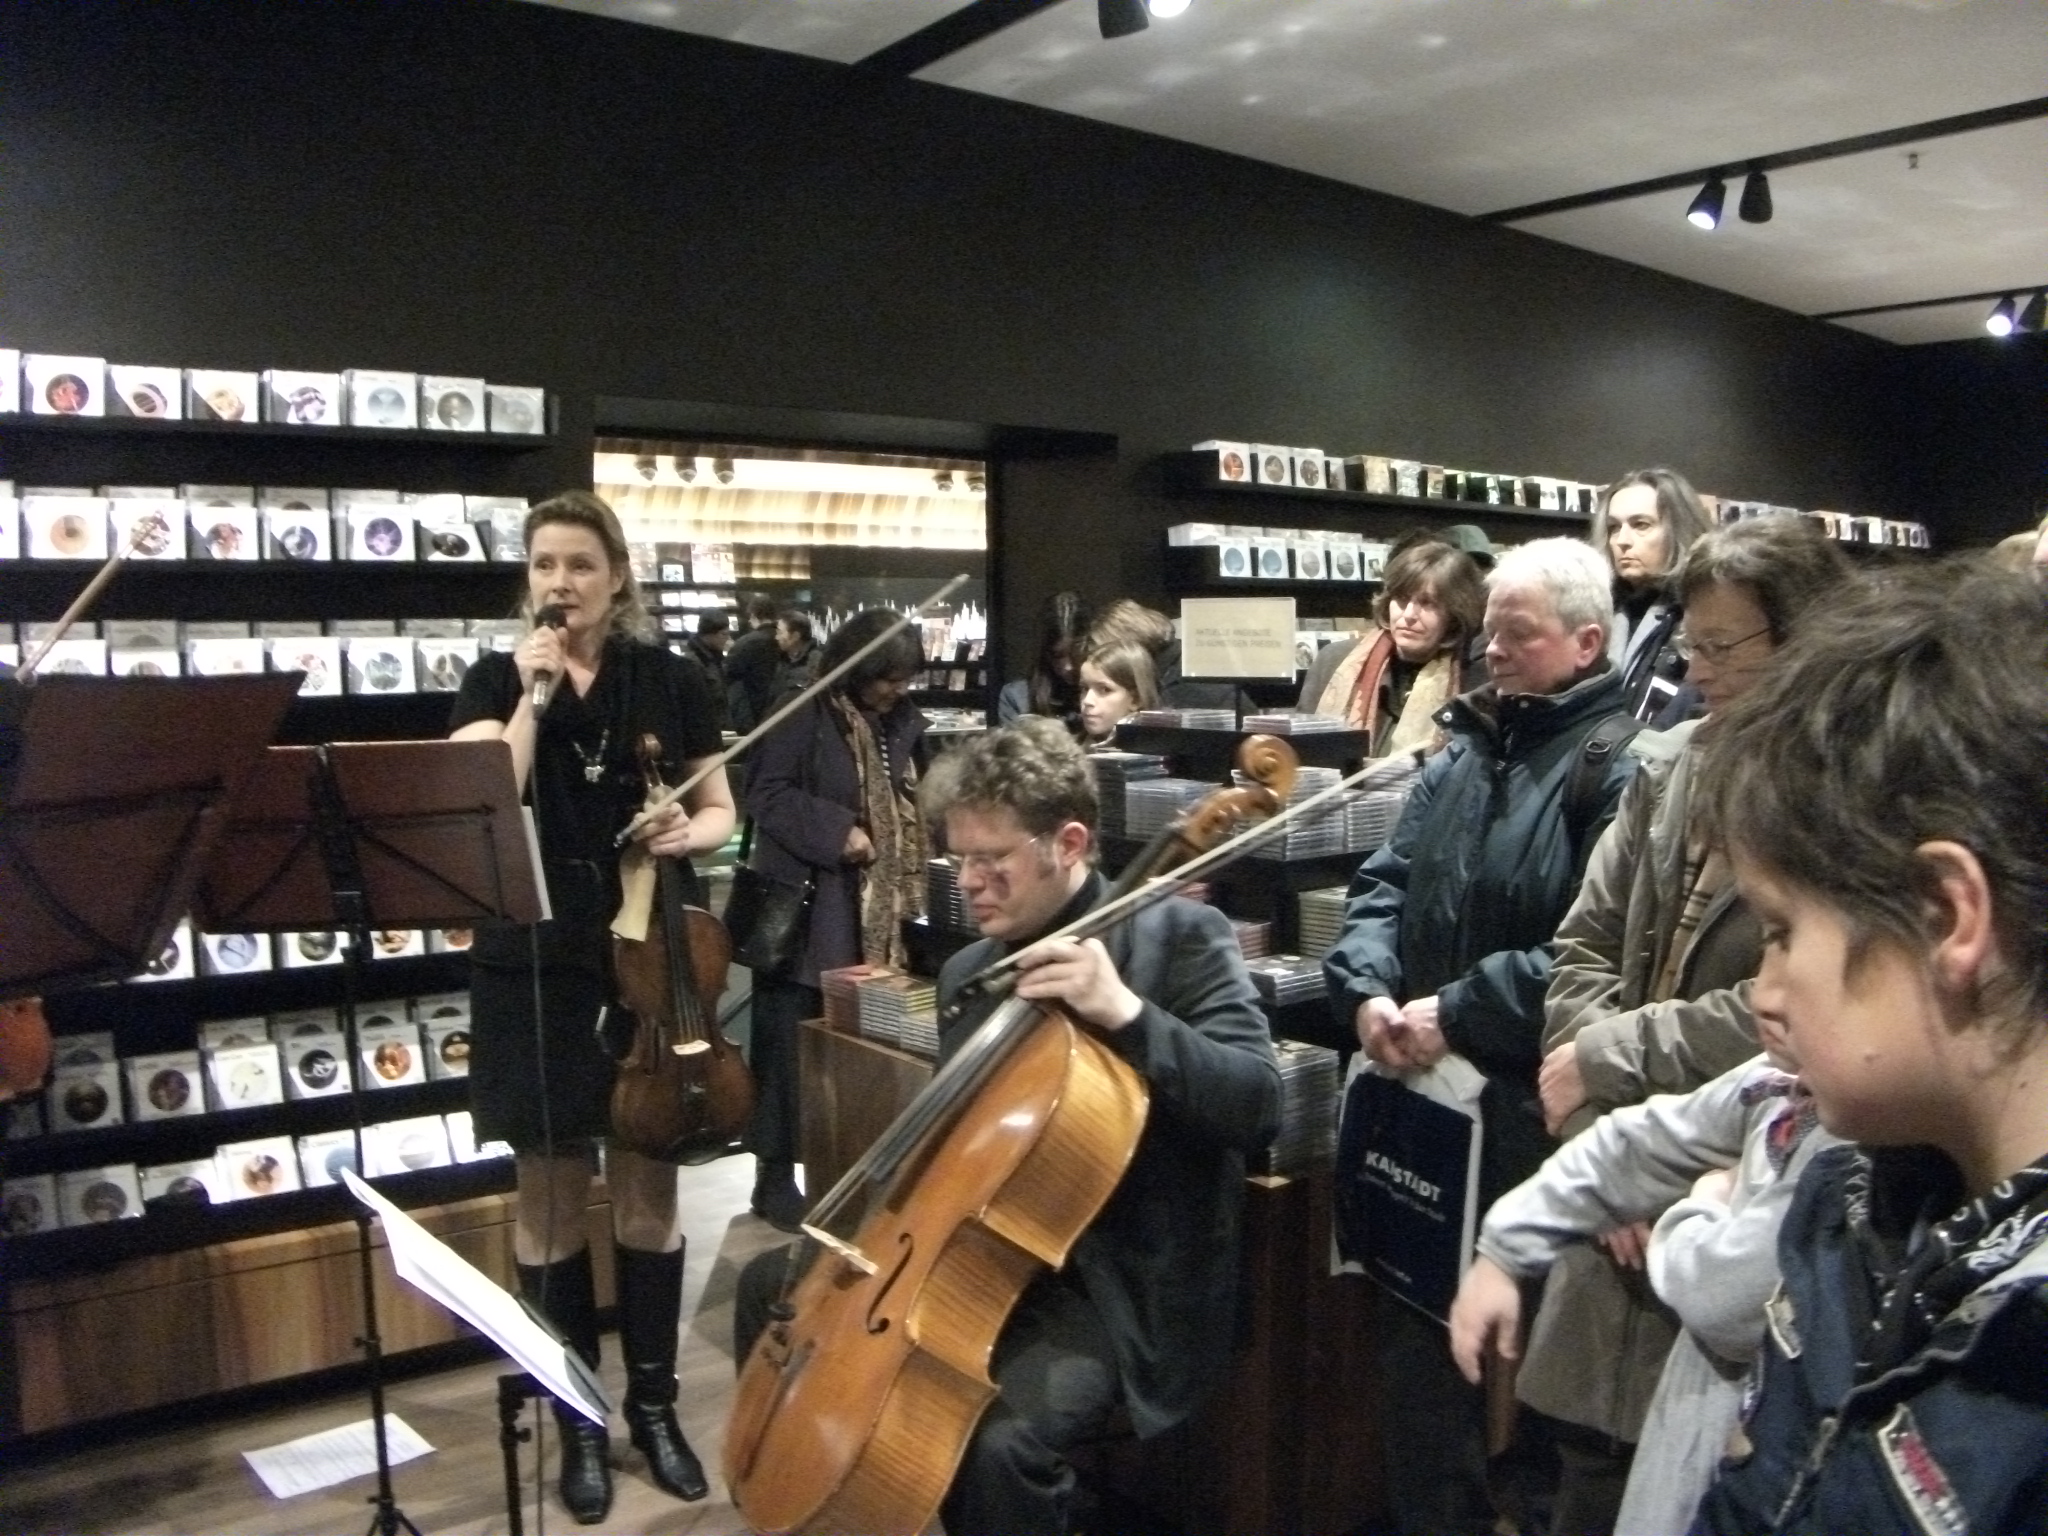 CD Showcase at Ludwig Beck München